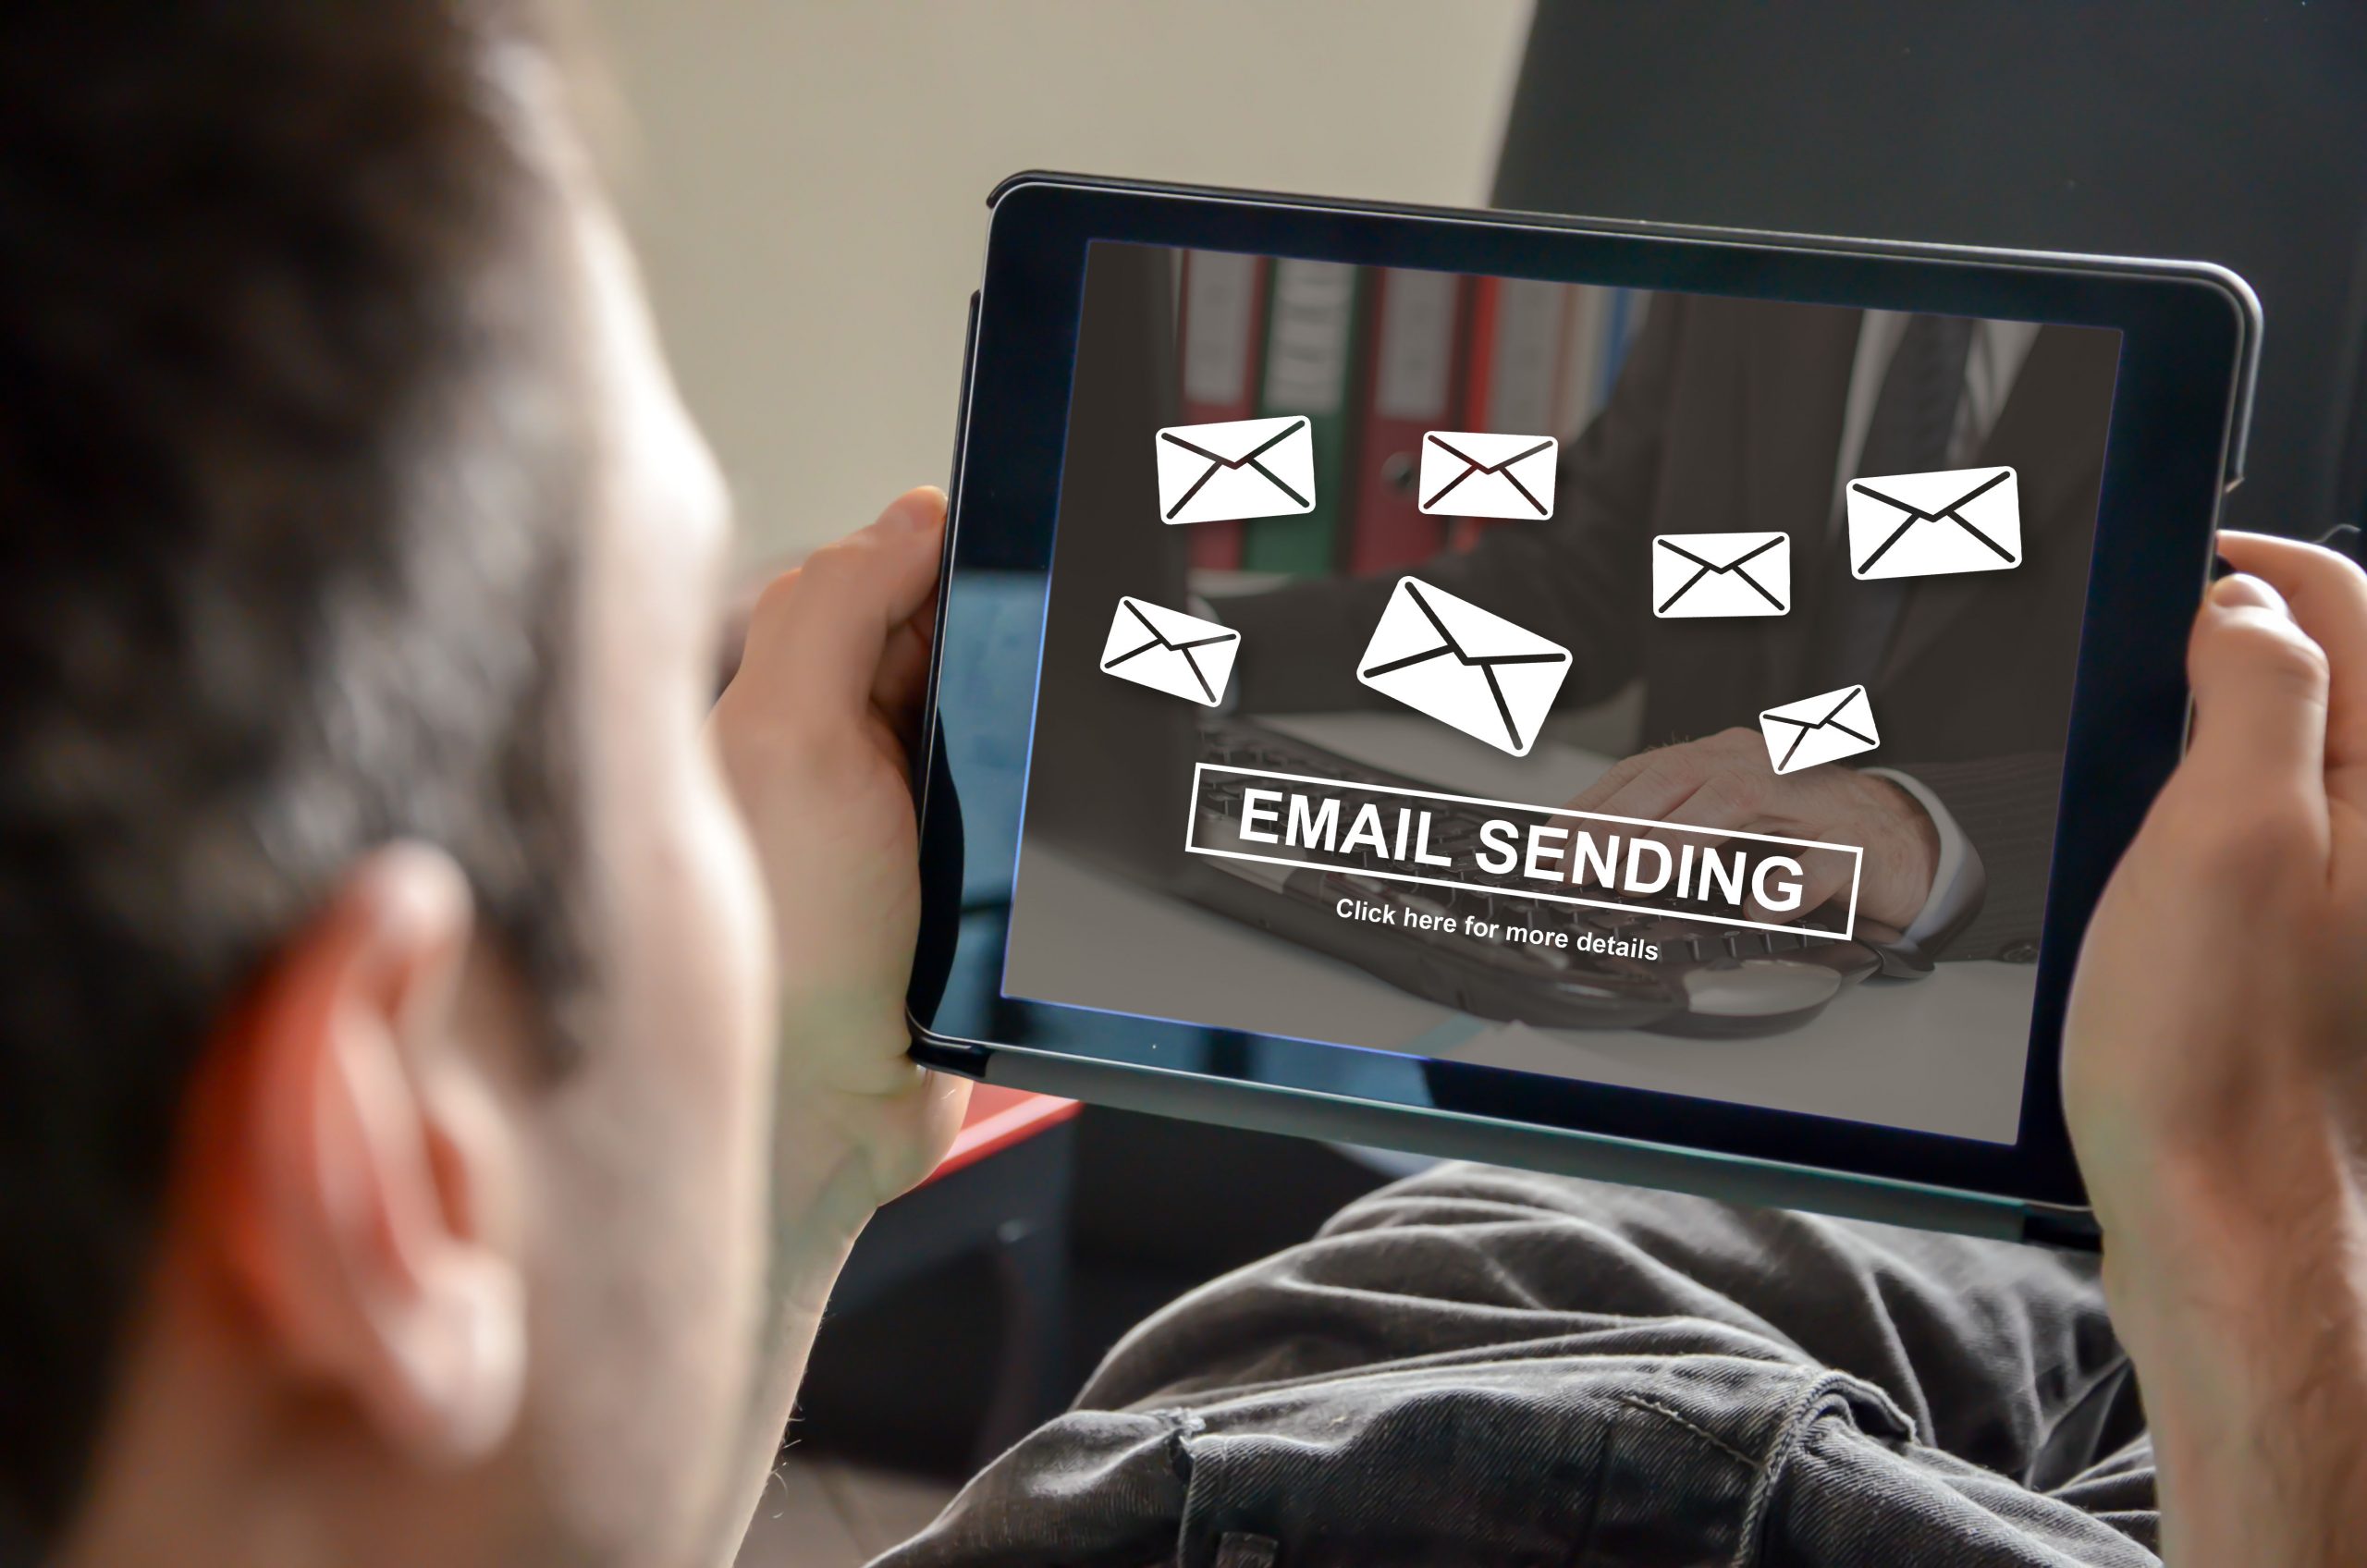 Email sending concept on a tablet